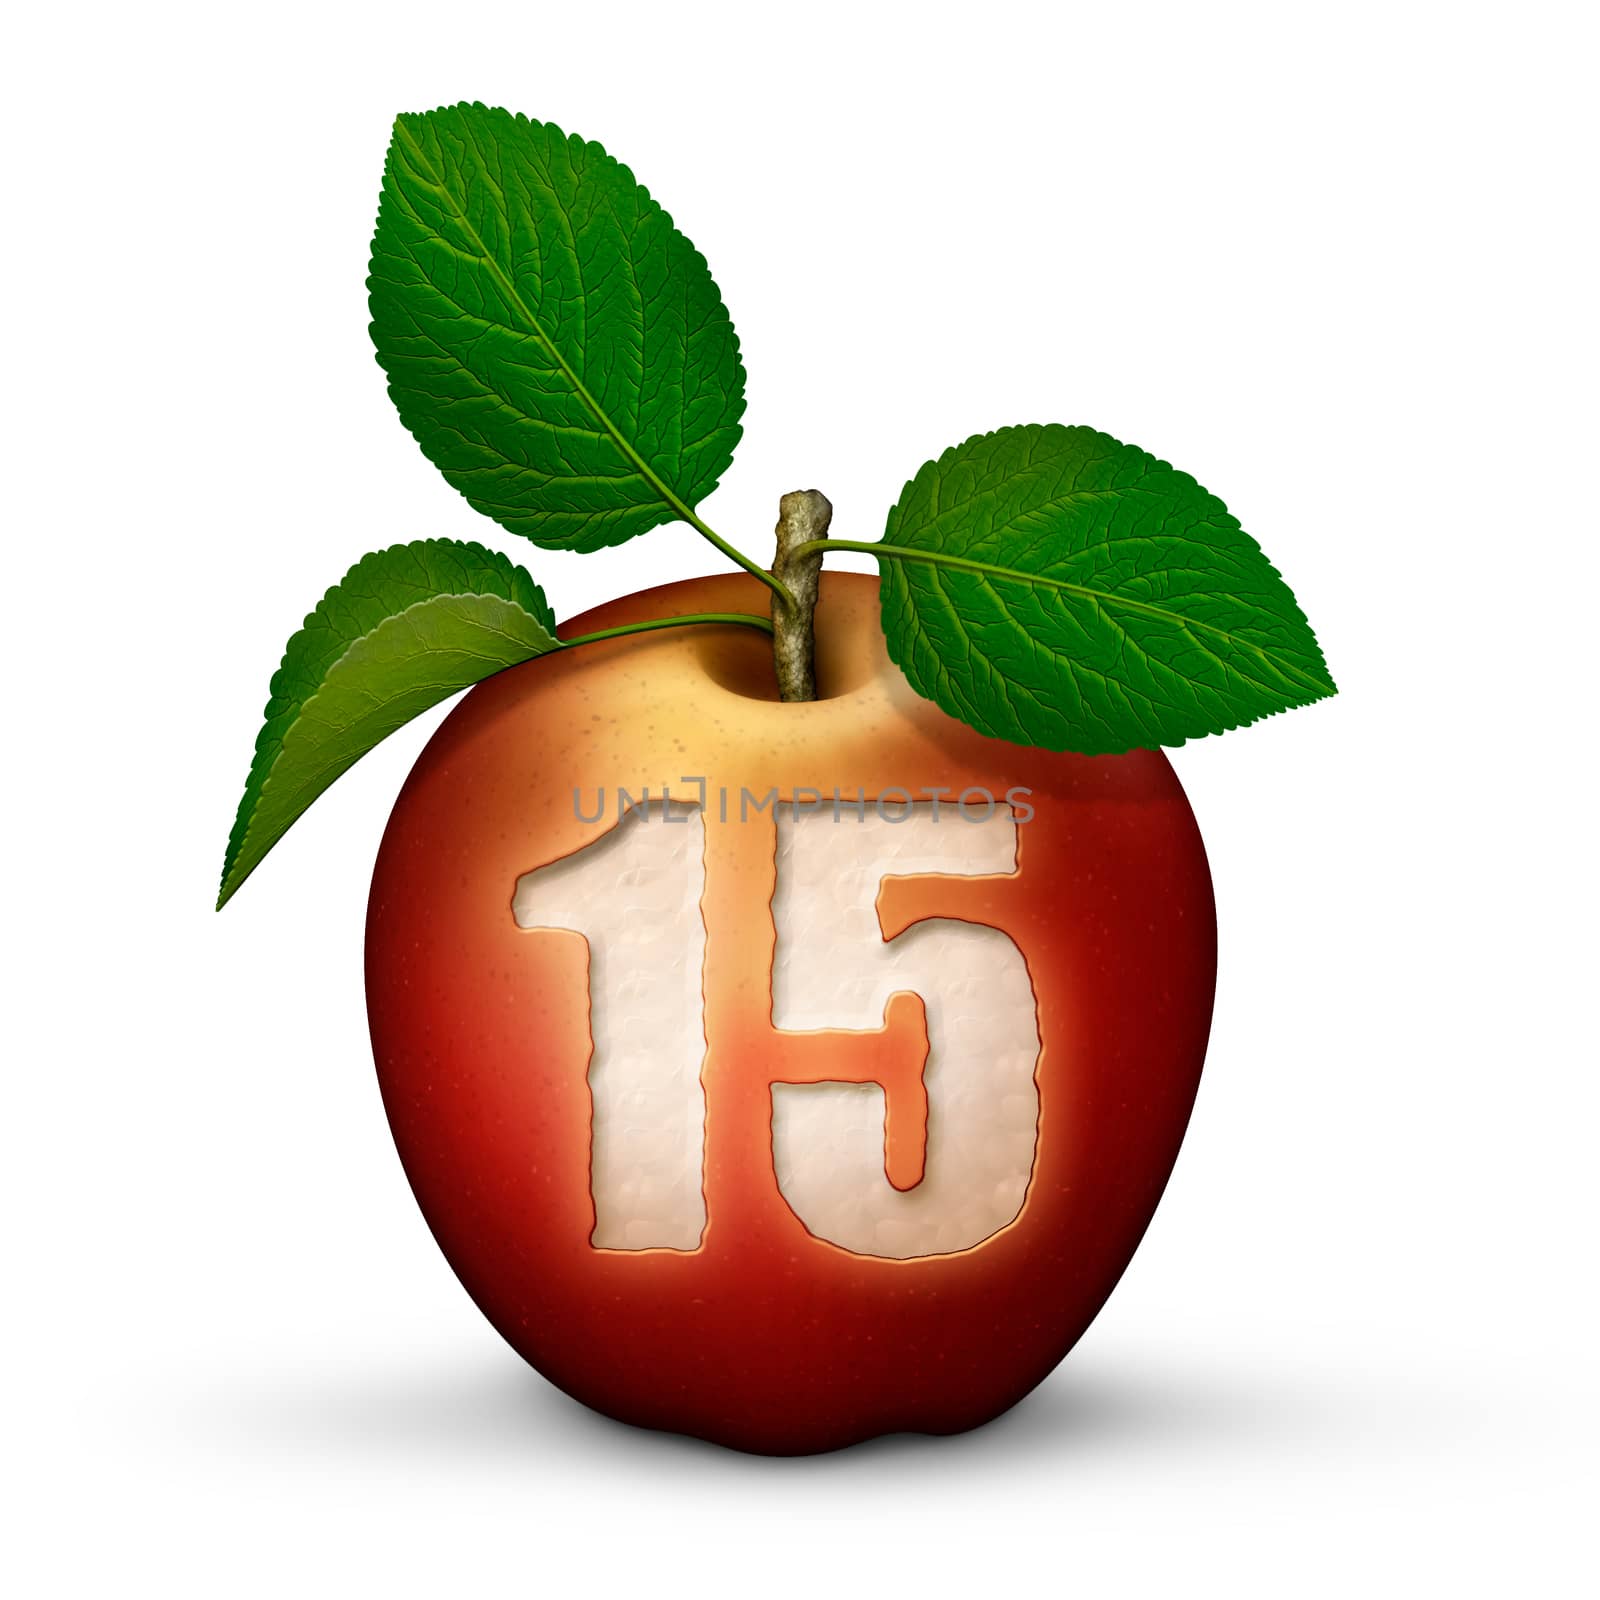 3D illustration of an apple with the number 15 bitten out of it.